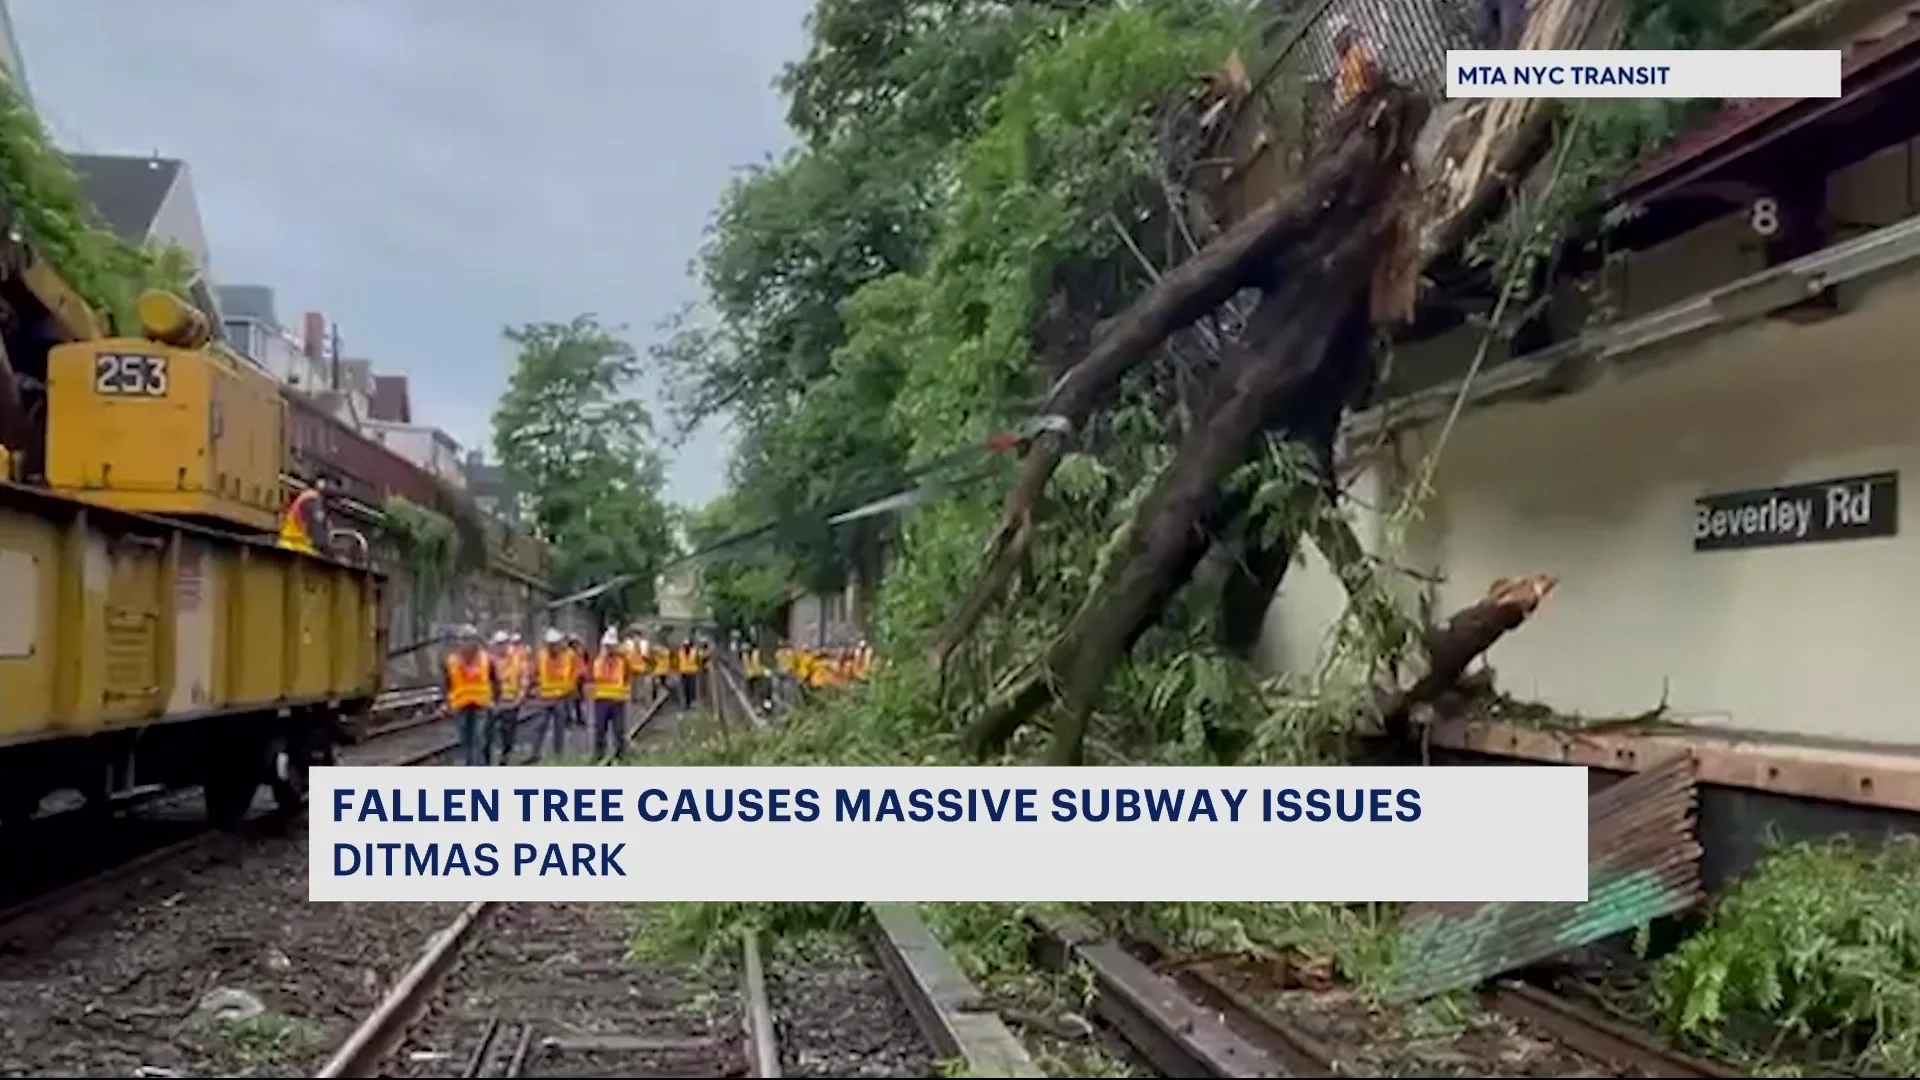 Fallen tree on tracks in Ditmas Park causes massive subway issues